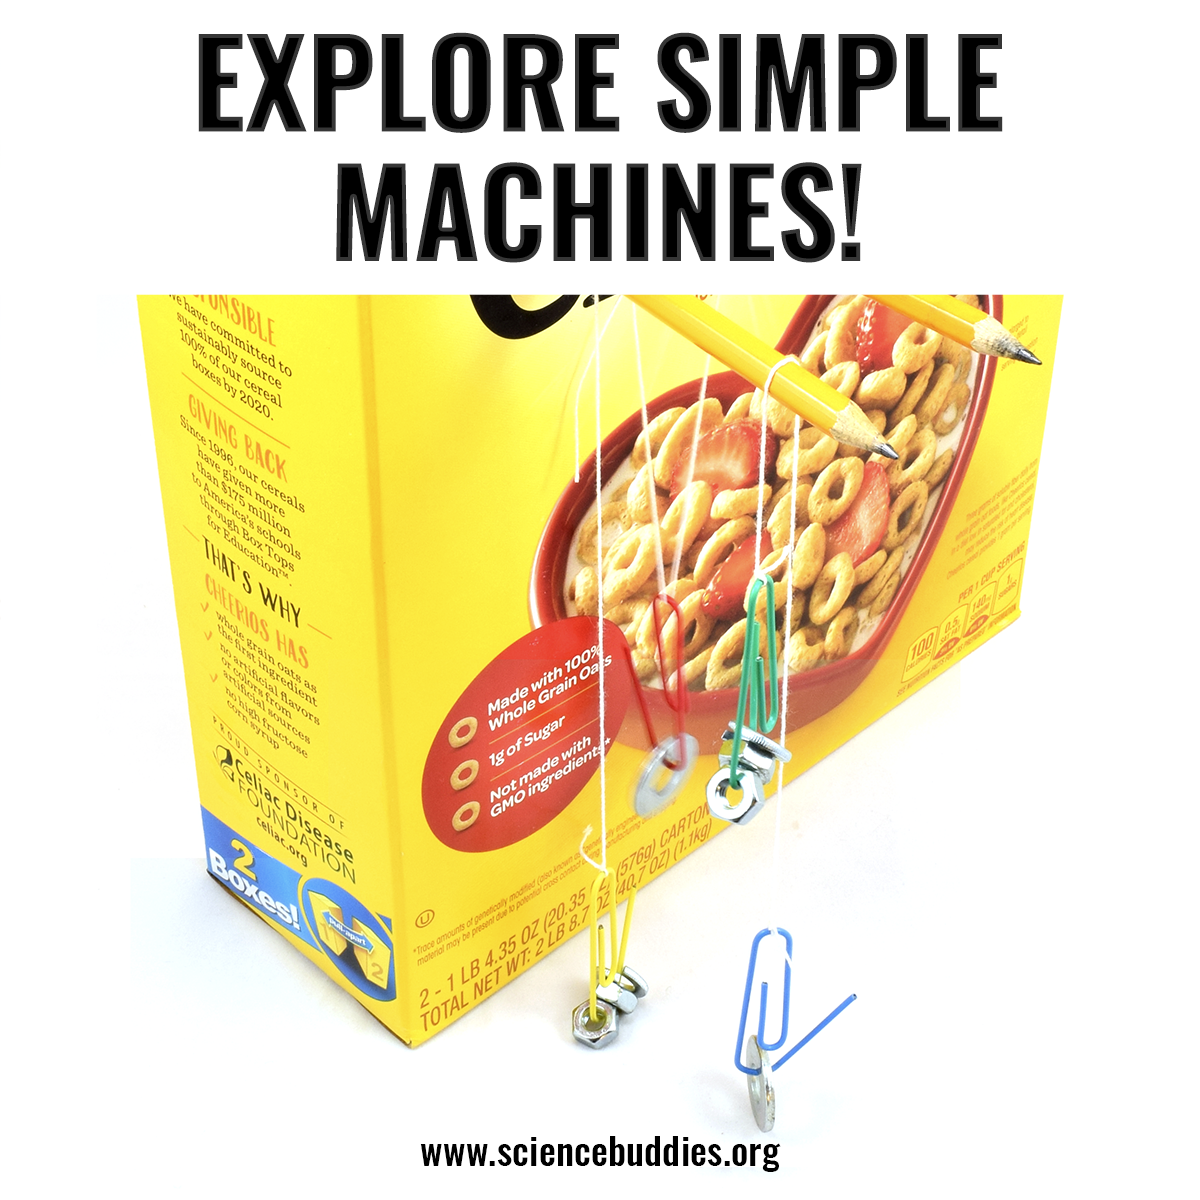 A pulley experiment with a cardboard cereal box, string, and pencils - part of Simple Machines Collection at Science Buddies